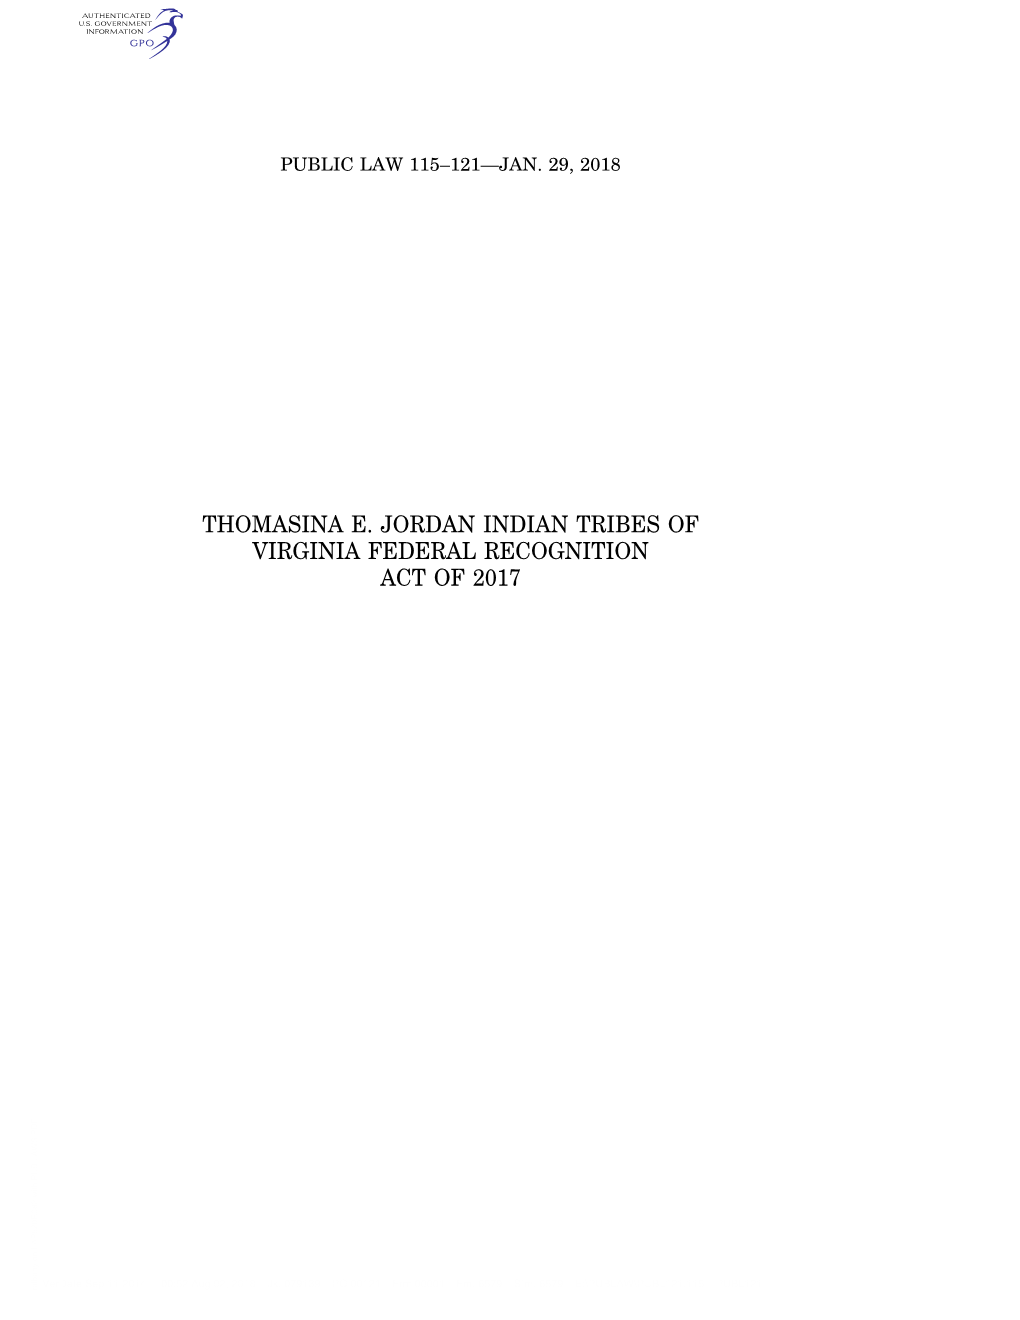 Thomasina E. Jordan Indian Tribes of Virginia Federal Recognition Act of 2017